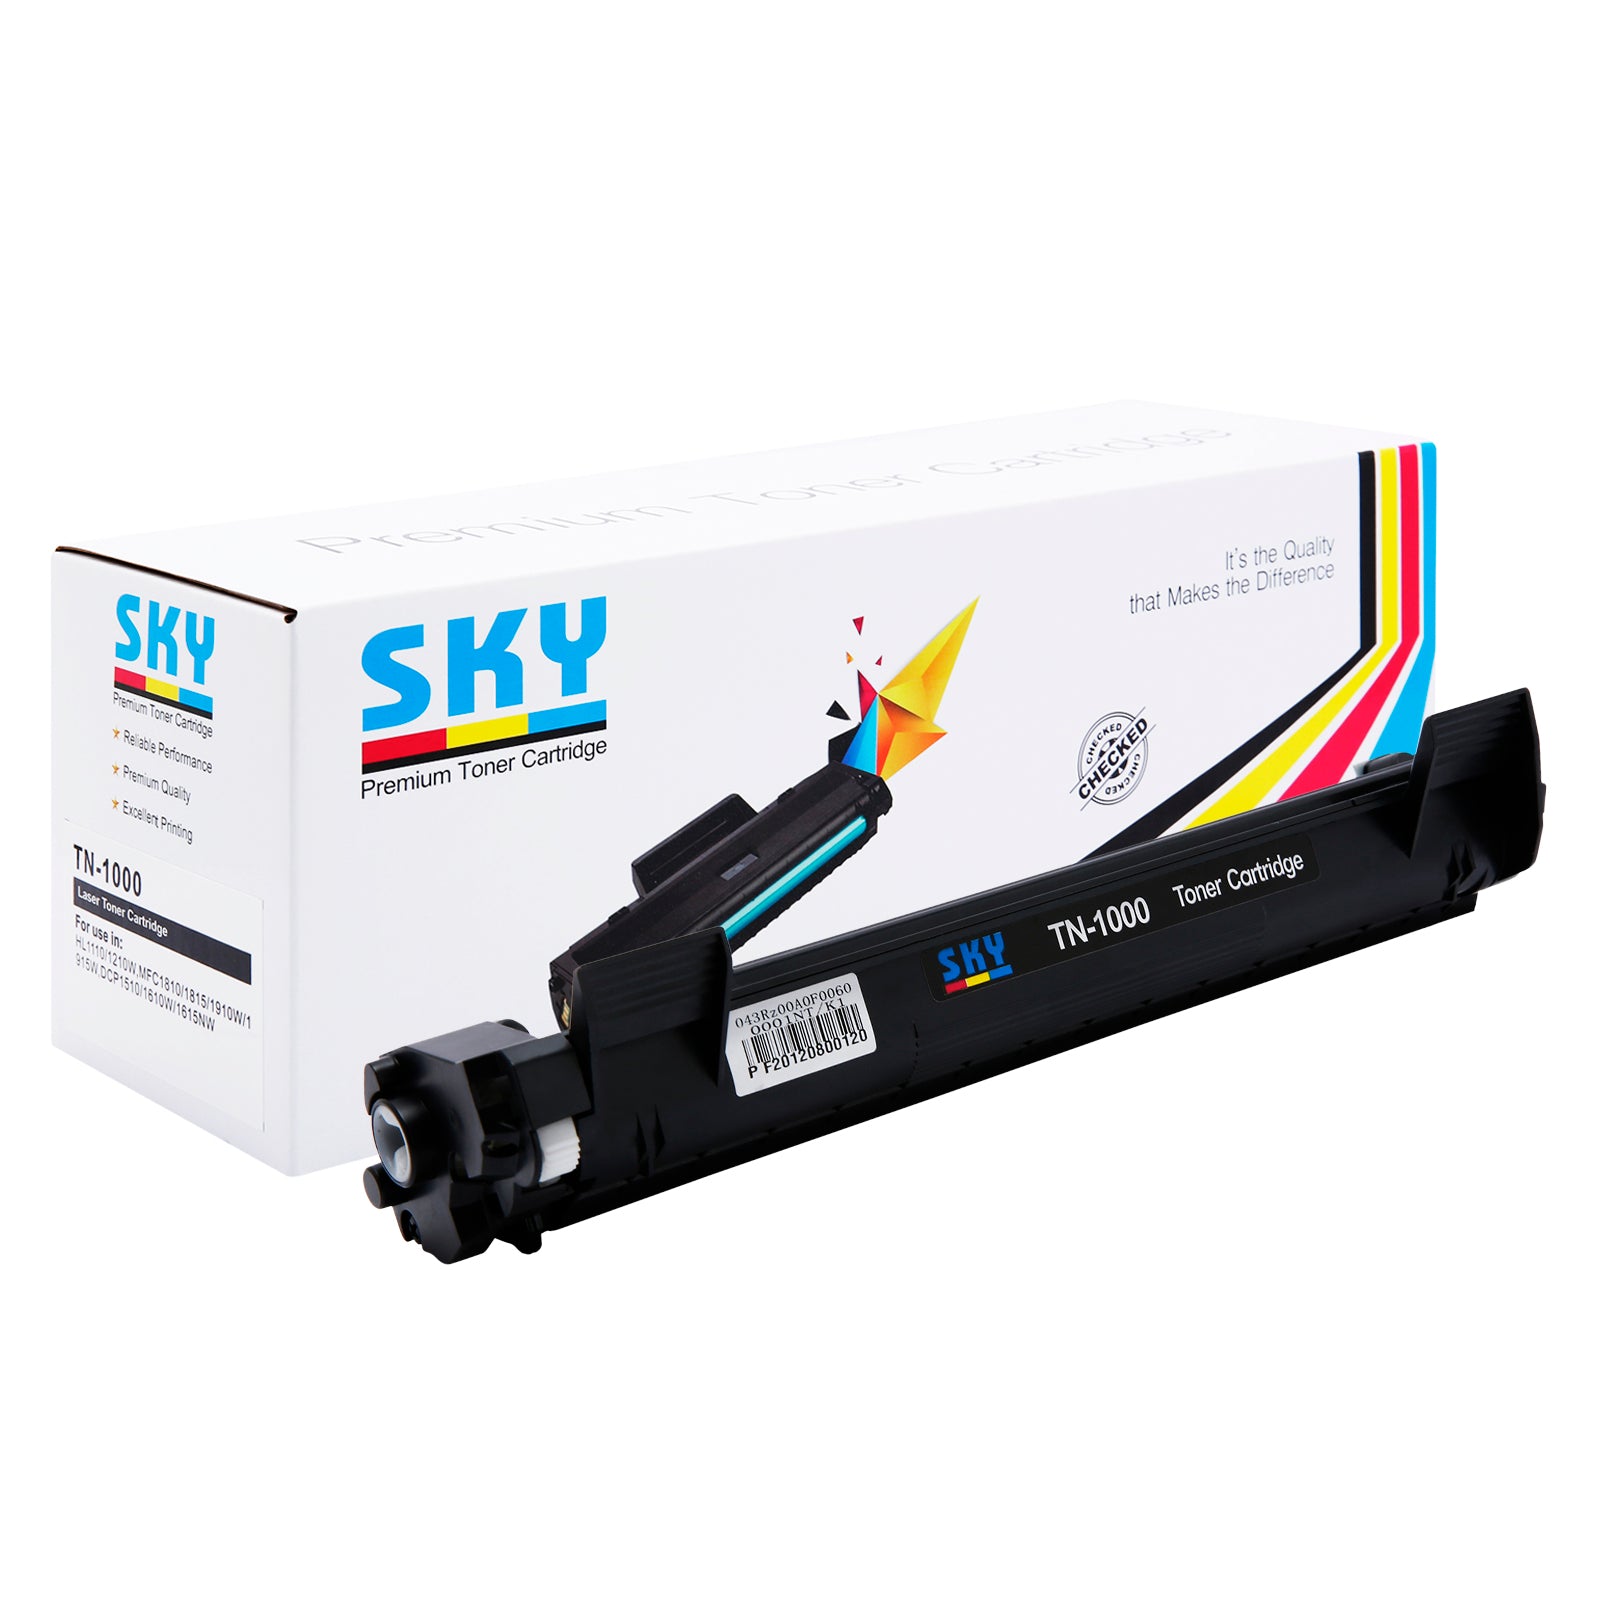 SKY TN-1000 Compatible Cartridge for HL-1110 HL-1210W DCP1510 DCP-1610W MFC-1910W MFC-1815 MFC-1810